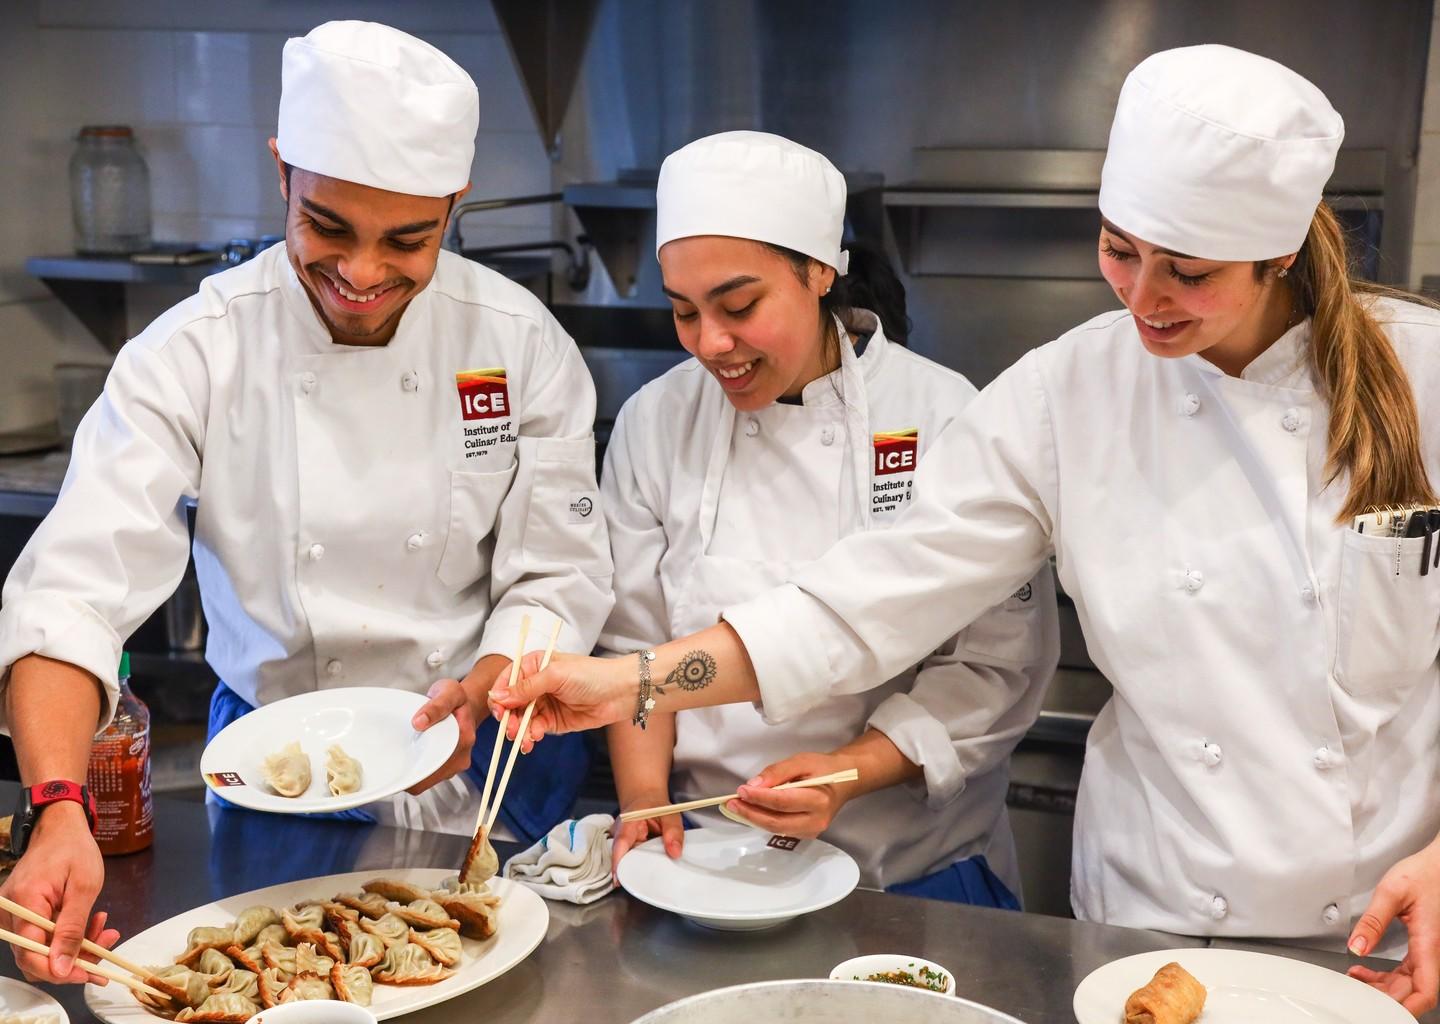 Institute of Culinary Education (ICE), USA - Ranking, Reviews